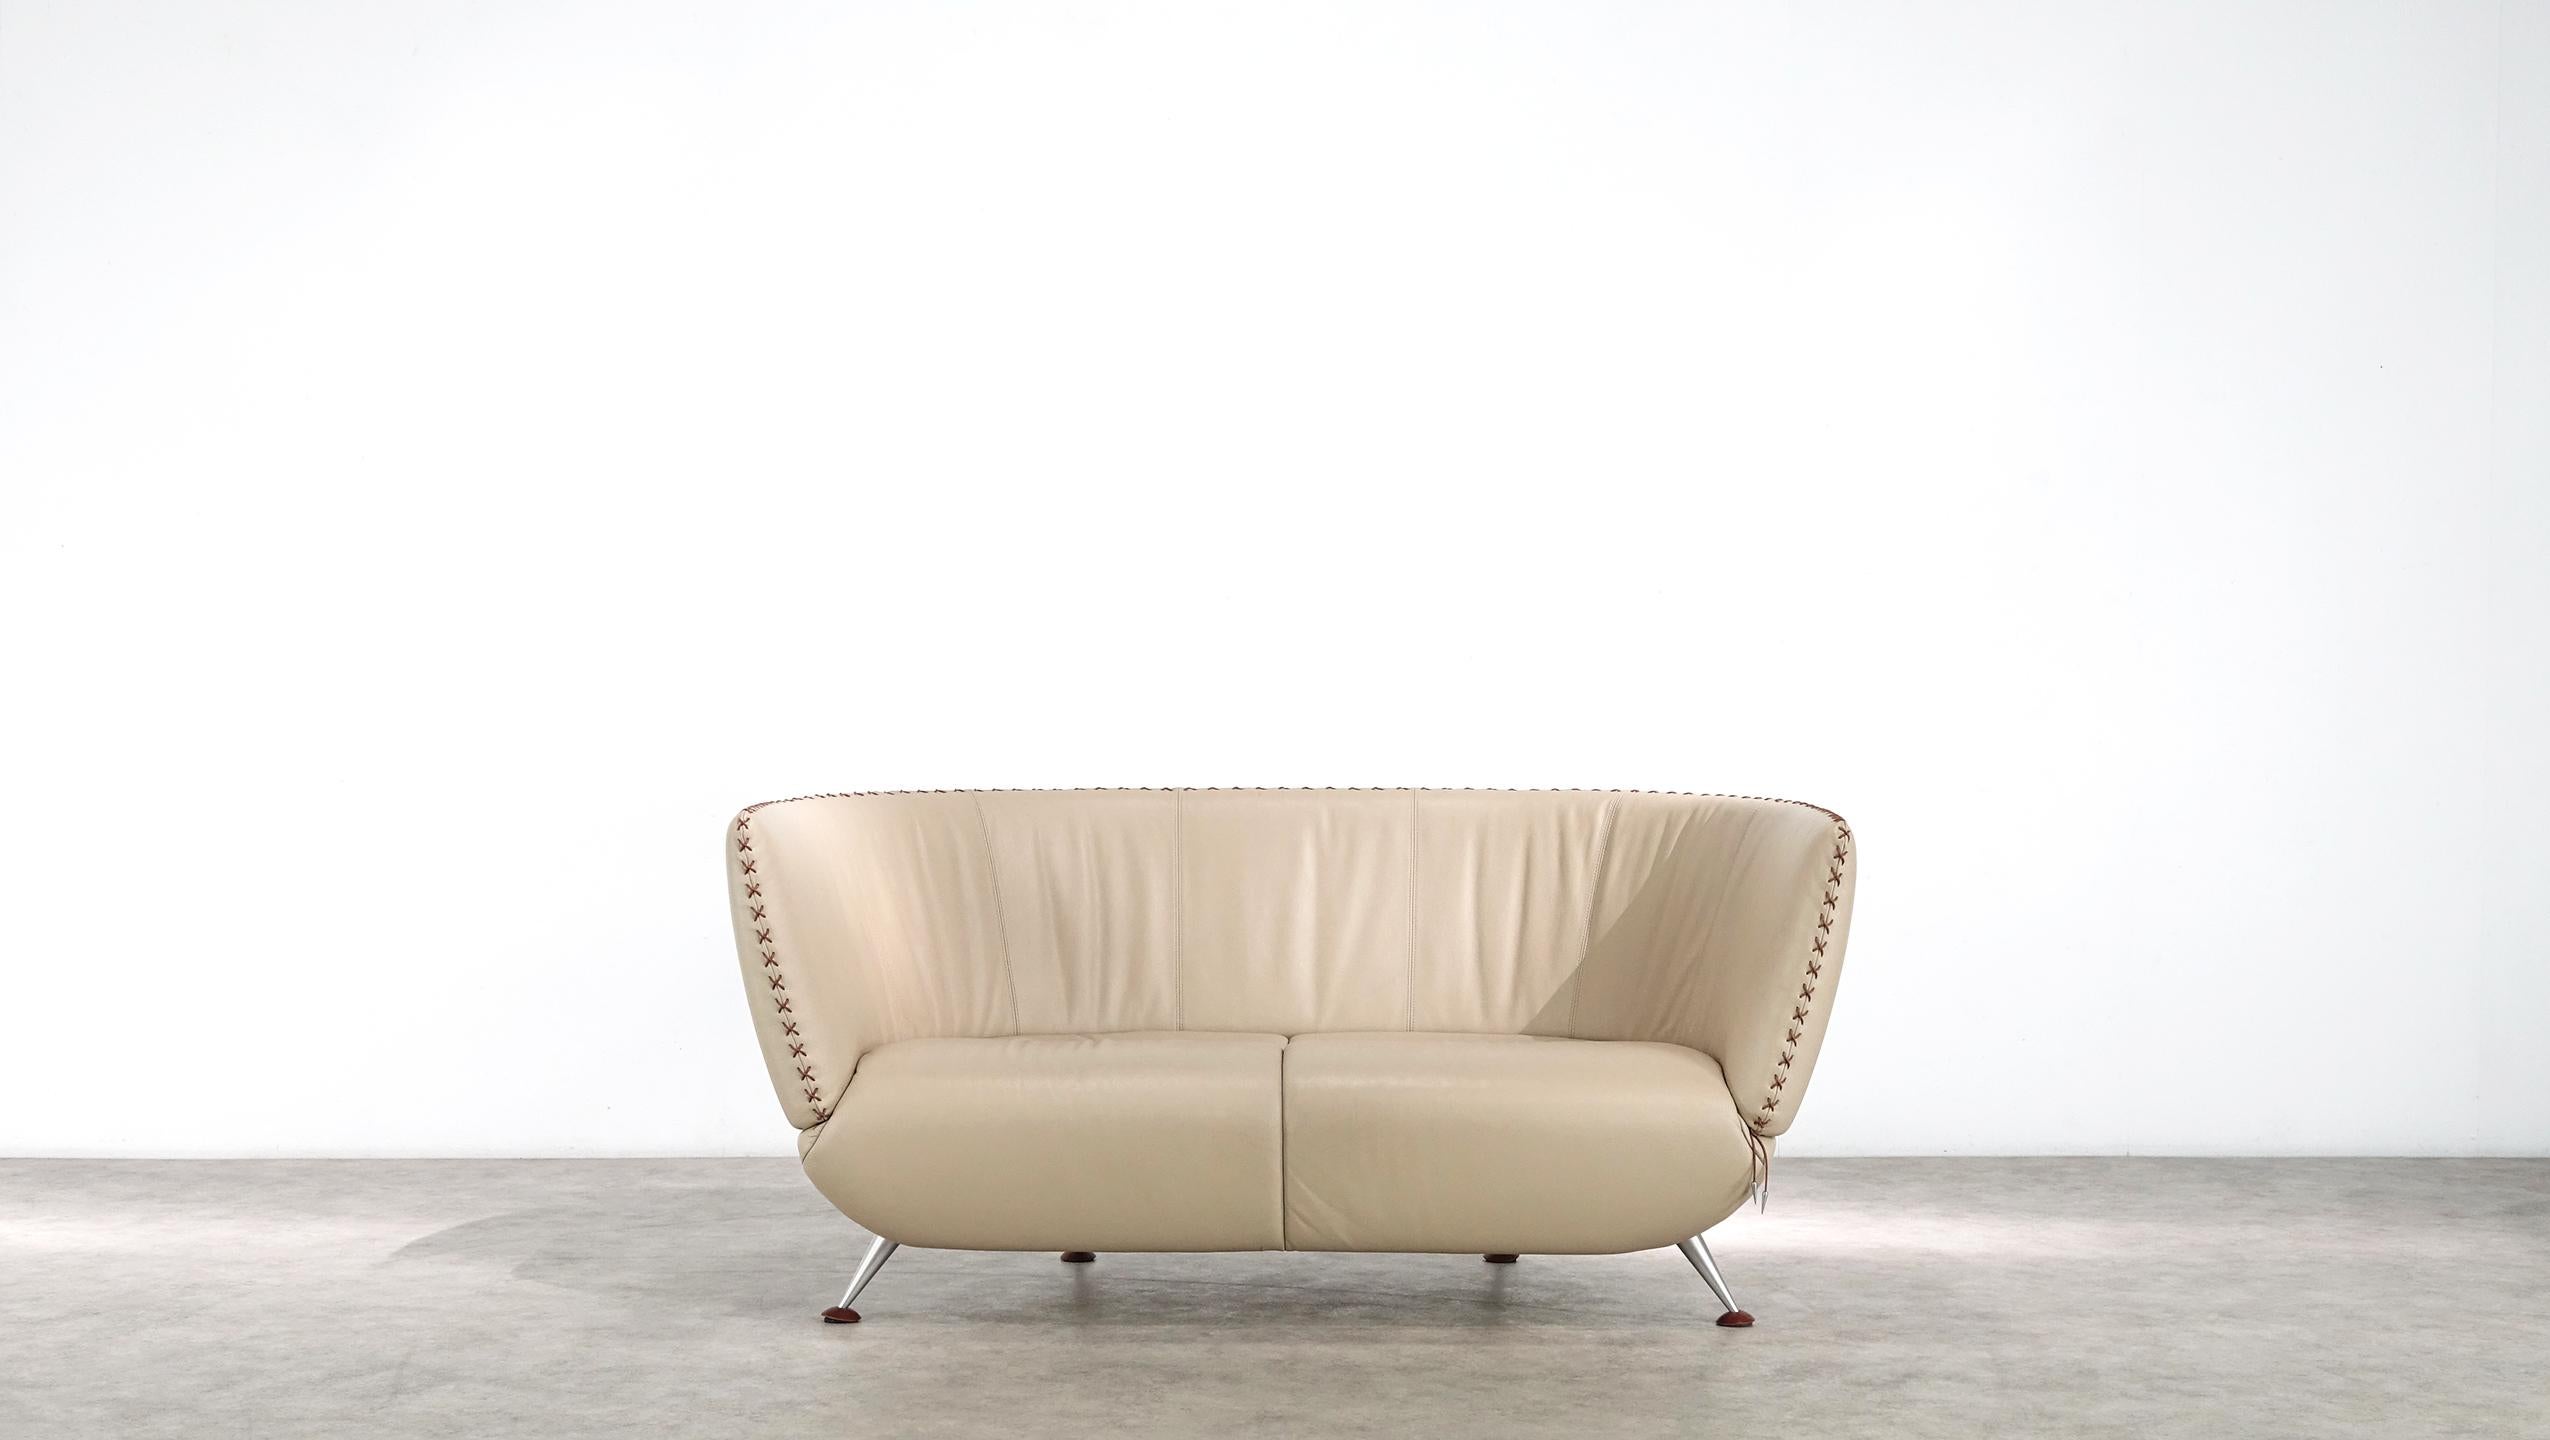 Post-Modern De Sede Ds 102 Two-Seater Sofa in Sand Upholstery by Mathias Hoffmann